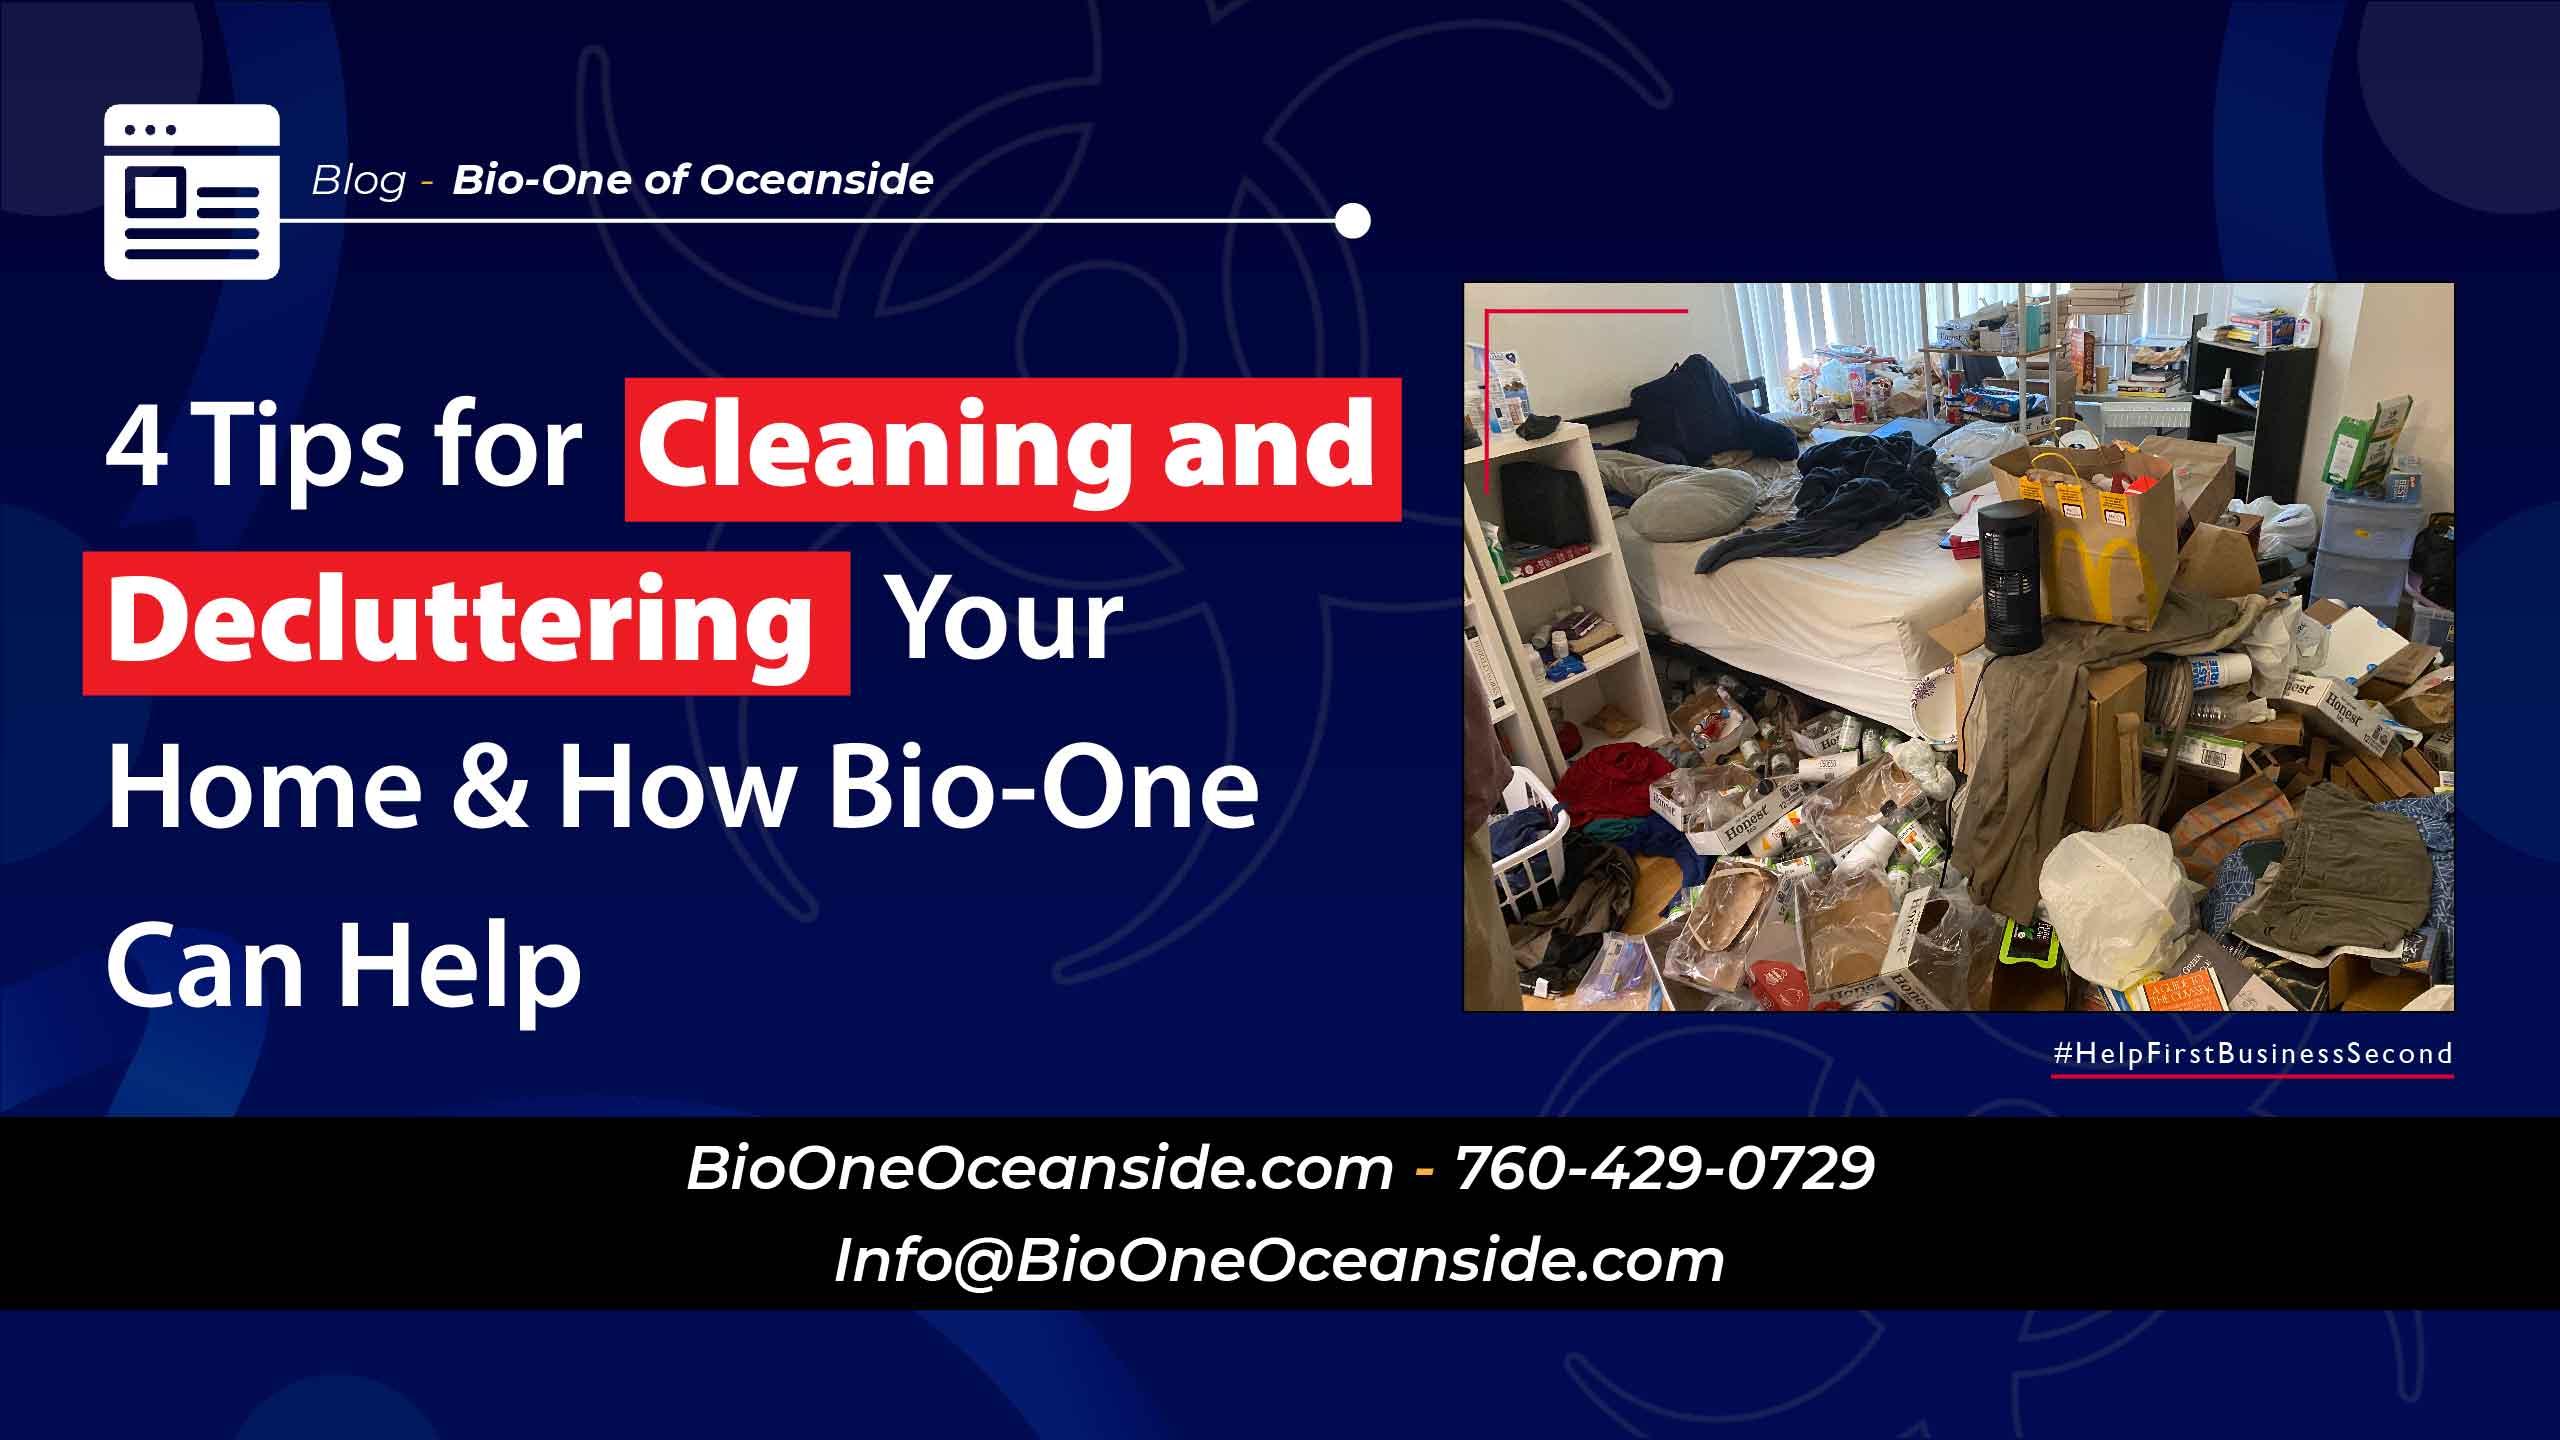 4 Tips for Cleaning and Decluttering Your Home & How Bio-One Can Help